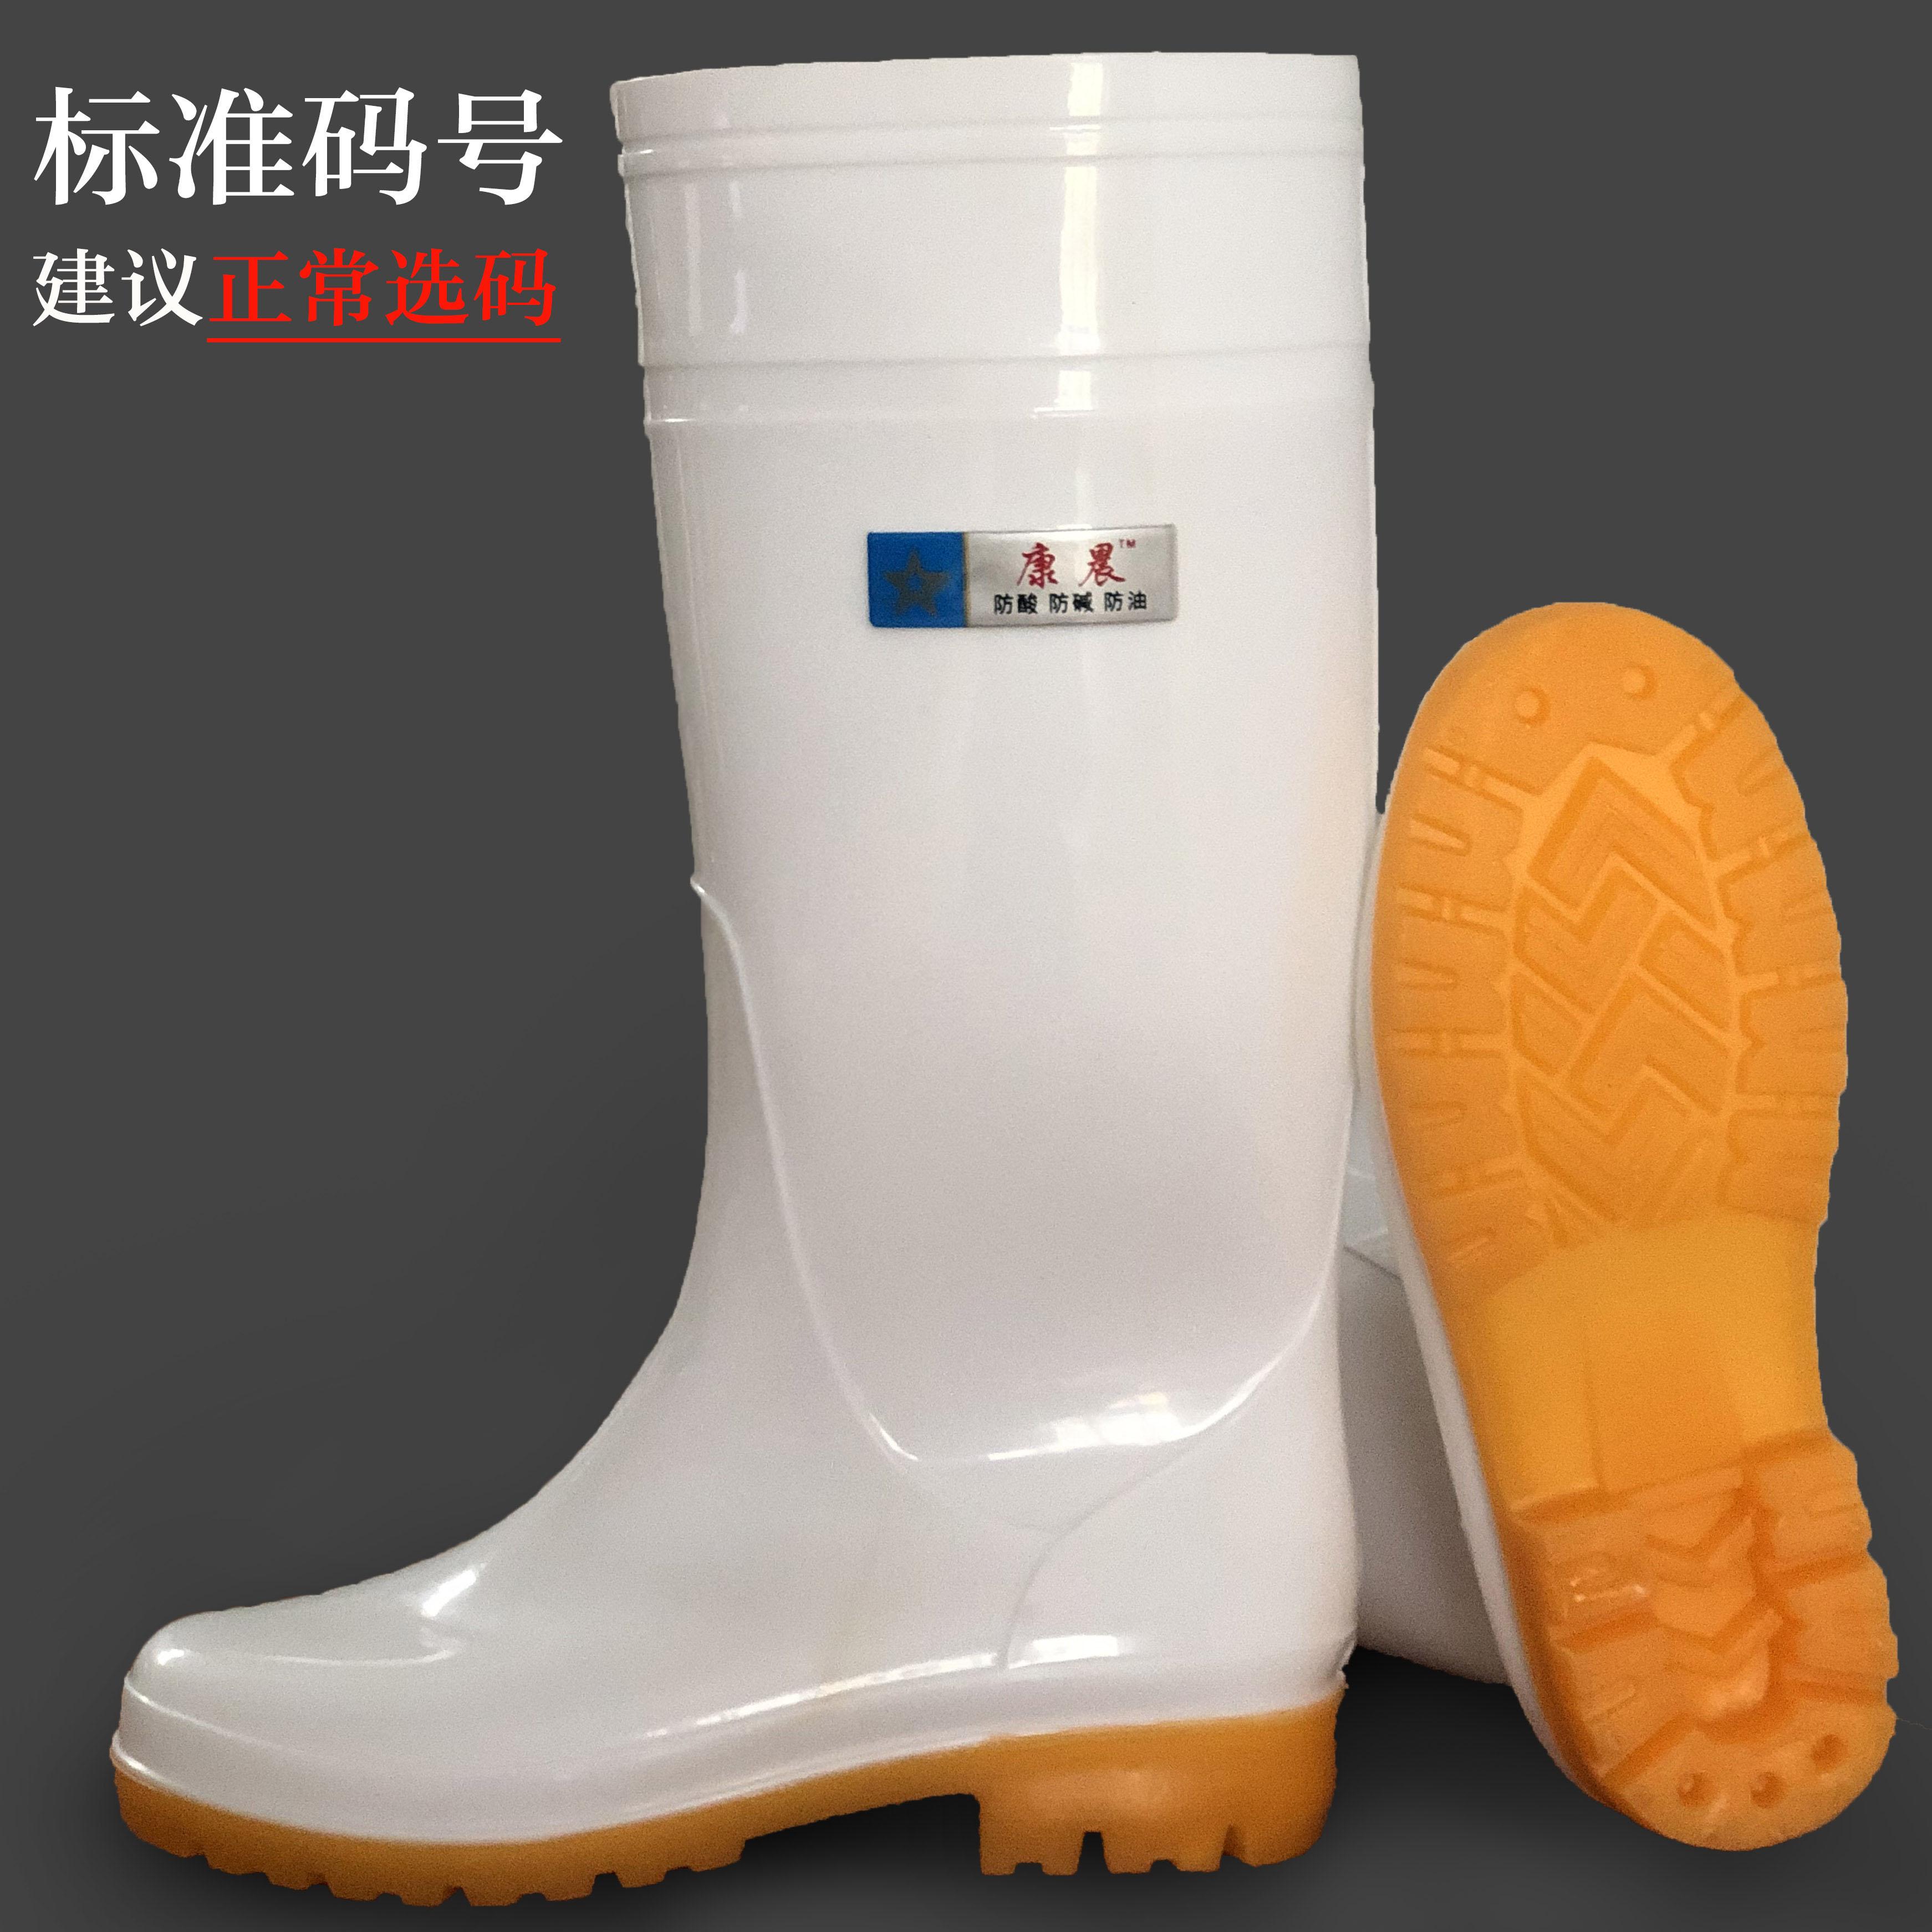 extra tall rubber boots